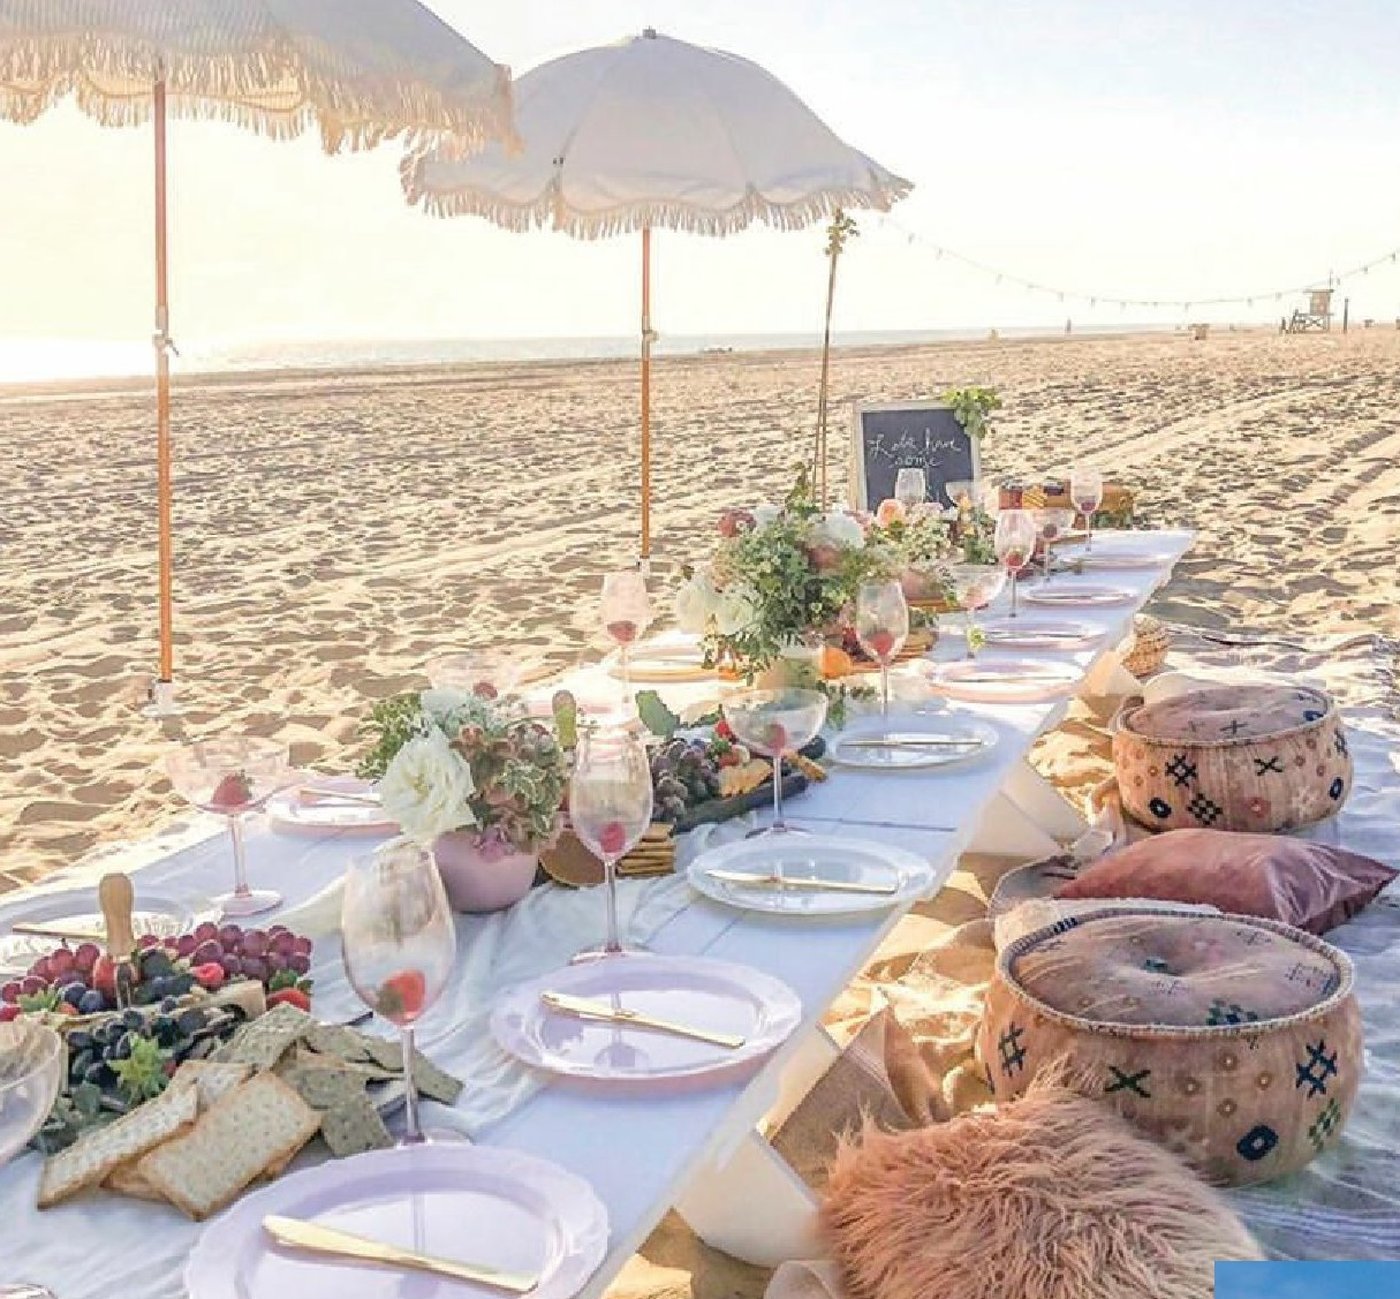 Let The Picnic Collective  create the ultimate seaside dining  experience, right on the sand PHOTO: COURTESY OF THE PICNIC COLLECTIVE